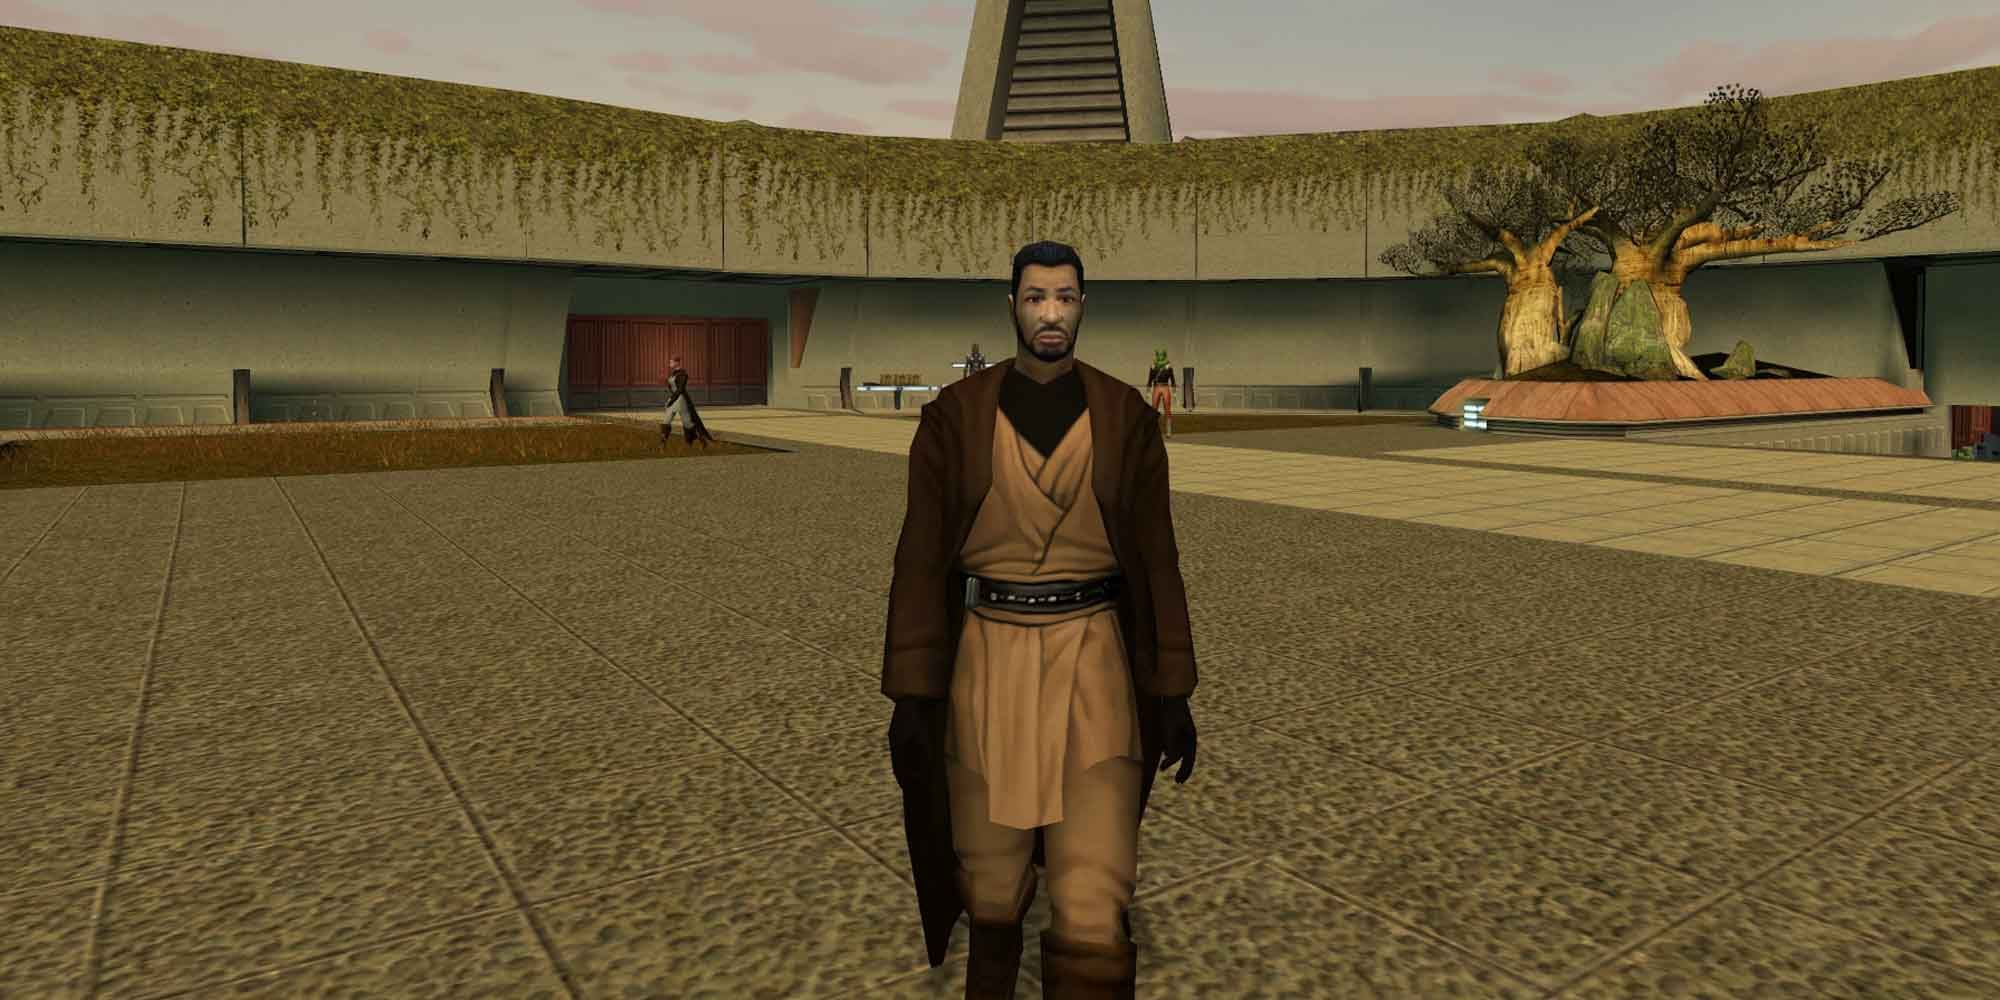 A Jedi standing in a courtyard in Star Wars: Knights of the Old Republic